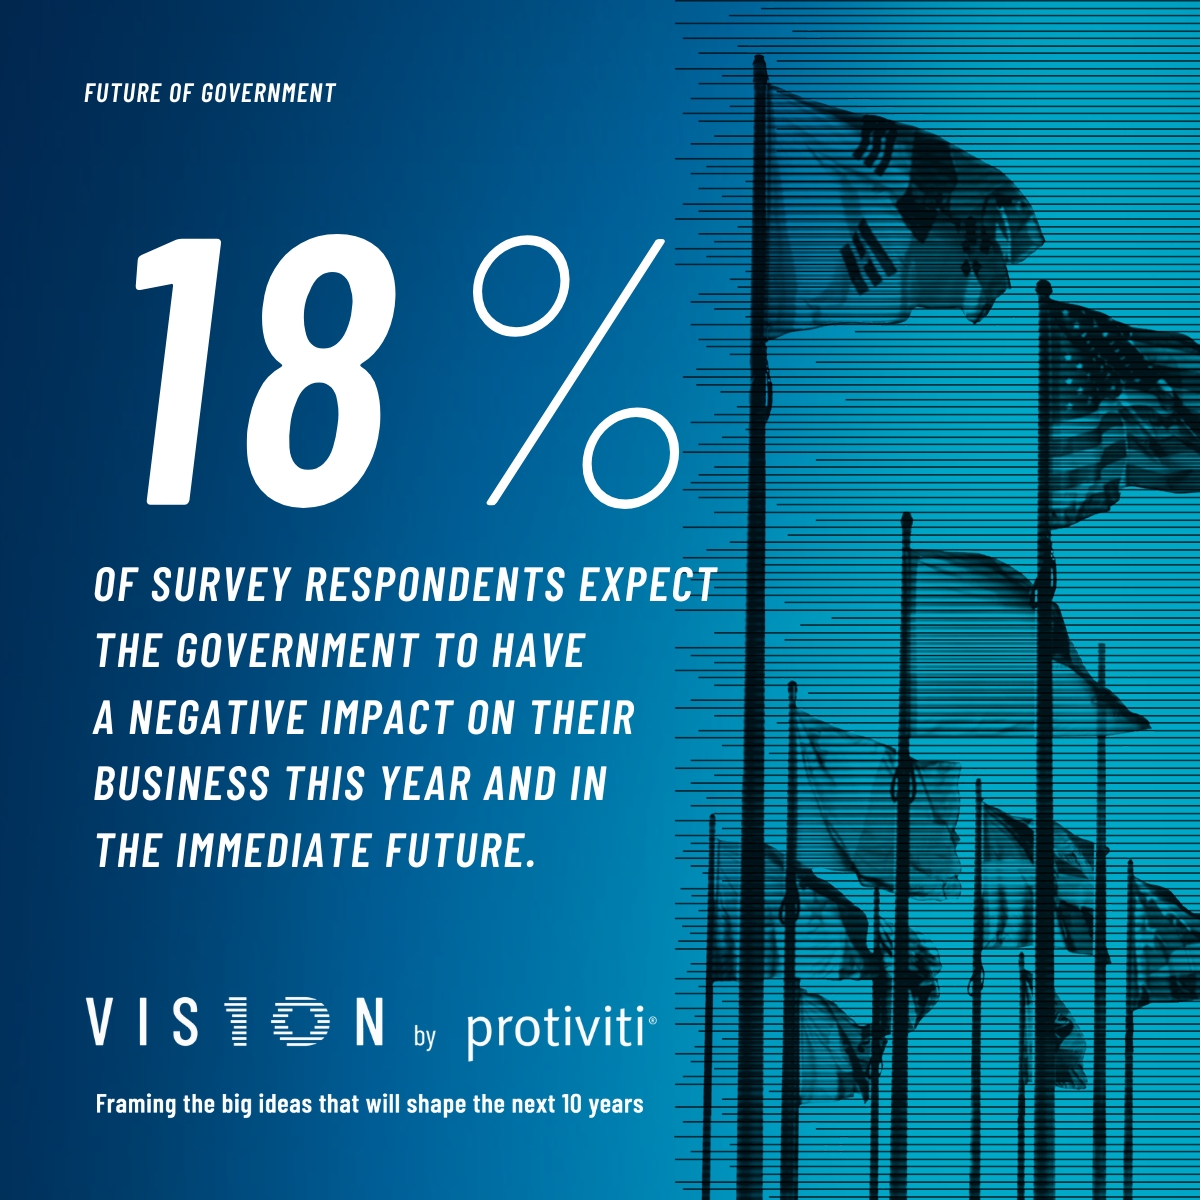 Half of Protiviti-Oxford Survey respondents are looking on the bright side; they believe the government will have a positive impact on their business over the next decade. Subscribe now to read the full report: ow.ly/F1x950Rywbt #VISIONbyProtiviti #FutureOfGovernment